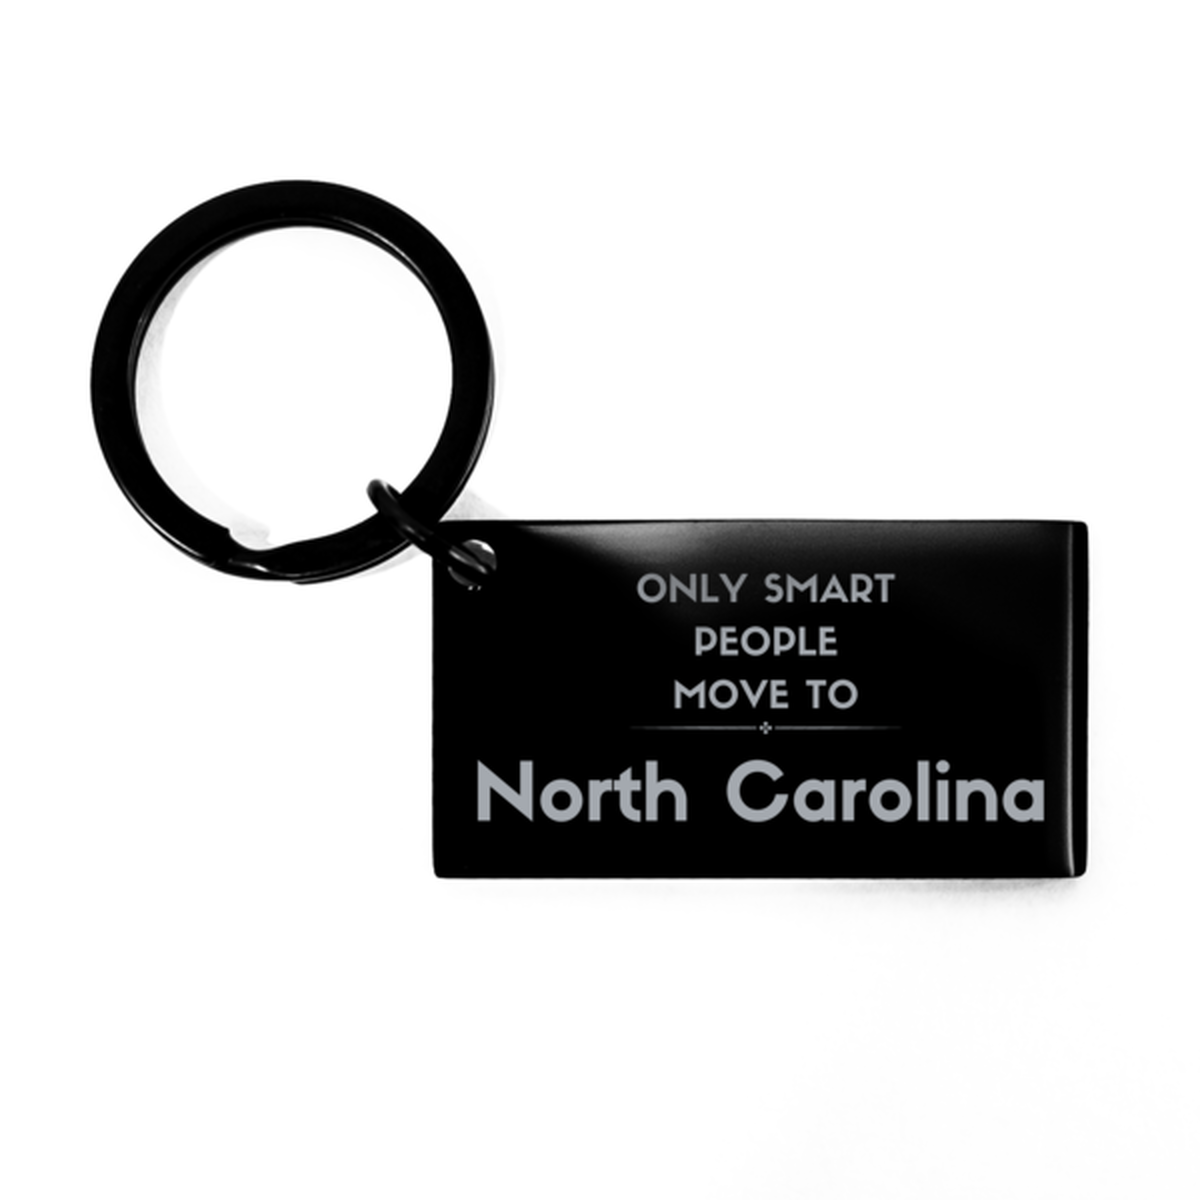 Only smart people move to North Carolina Keychain, Gag Gifts For North Carolina, Move to North Carolina Gifts for Friends Coworker Funny Saying Quote